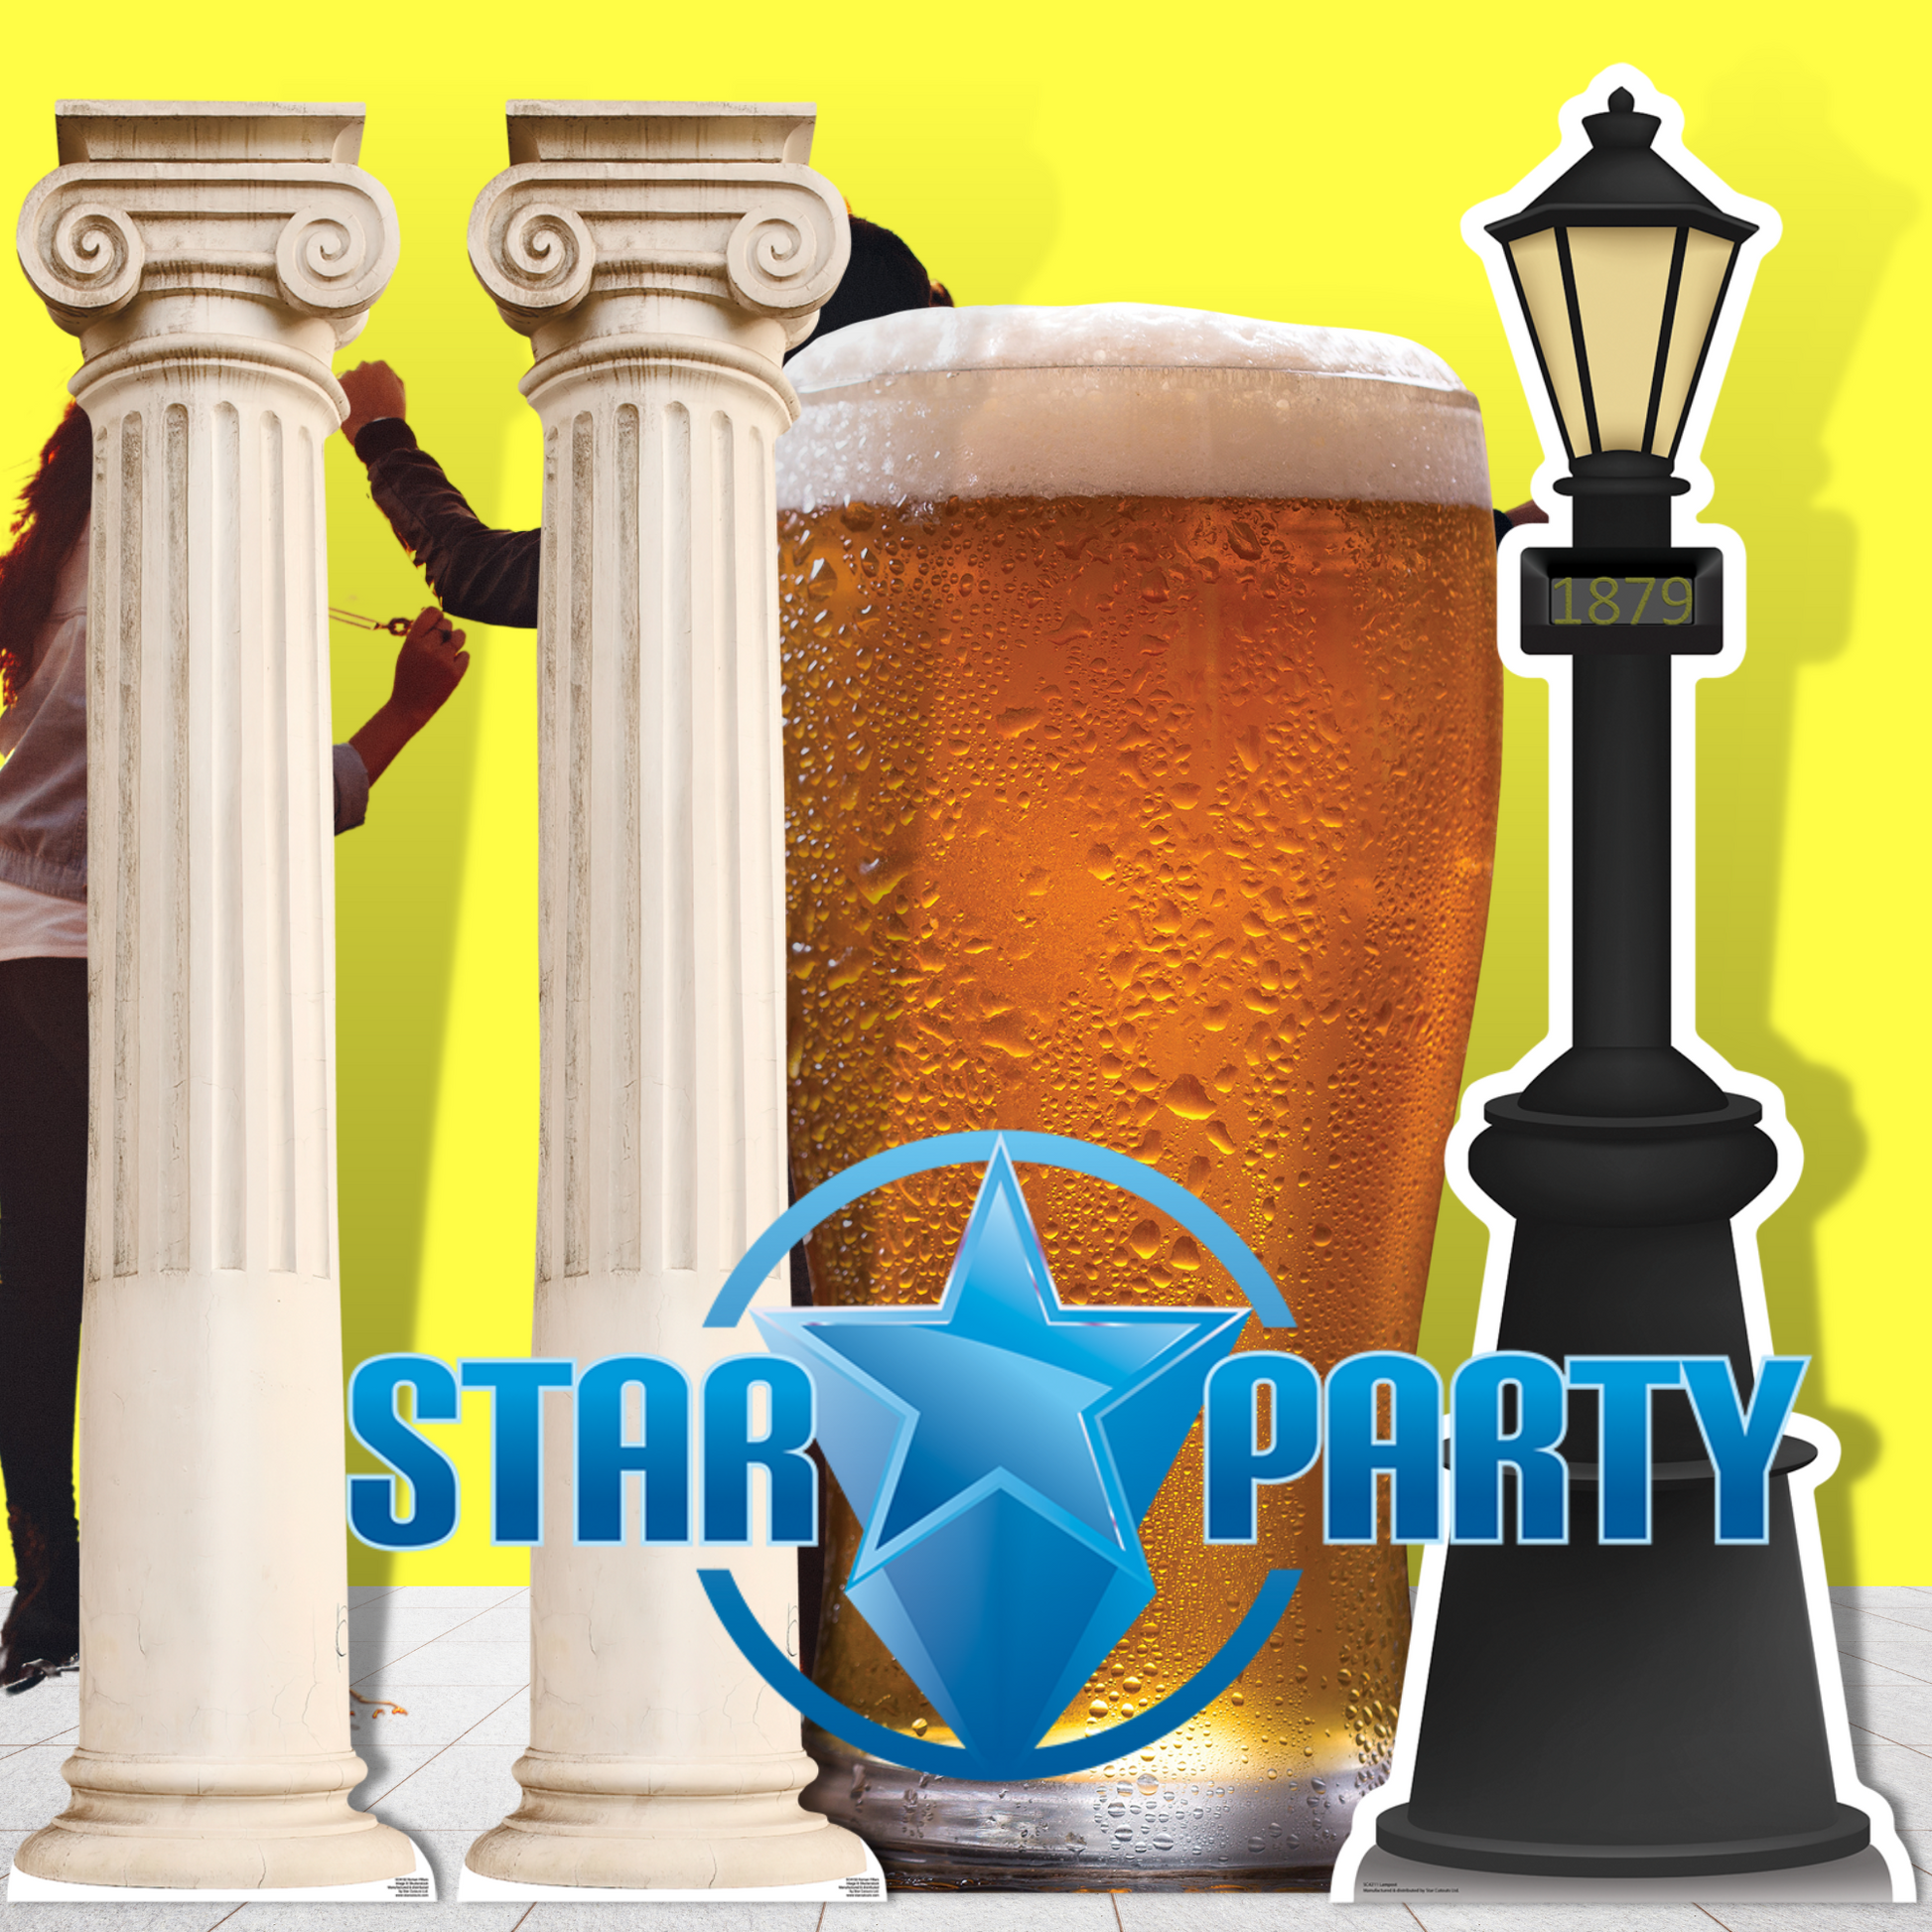 SC4209 Fresh Pint of Beer Cardboard Cut Out Height 188cm